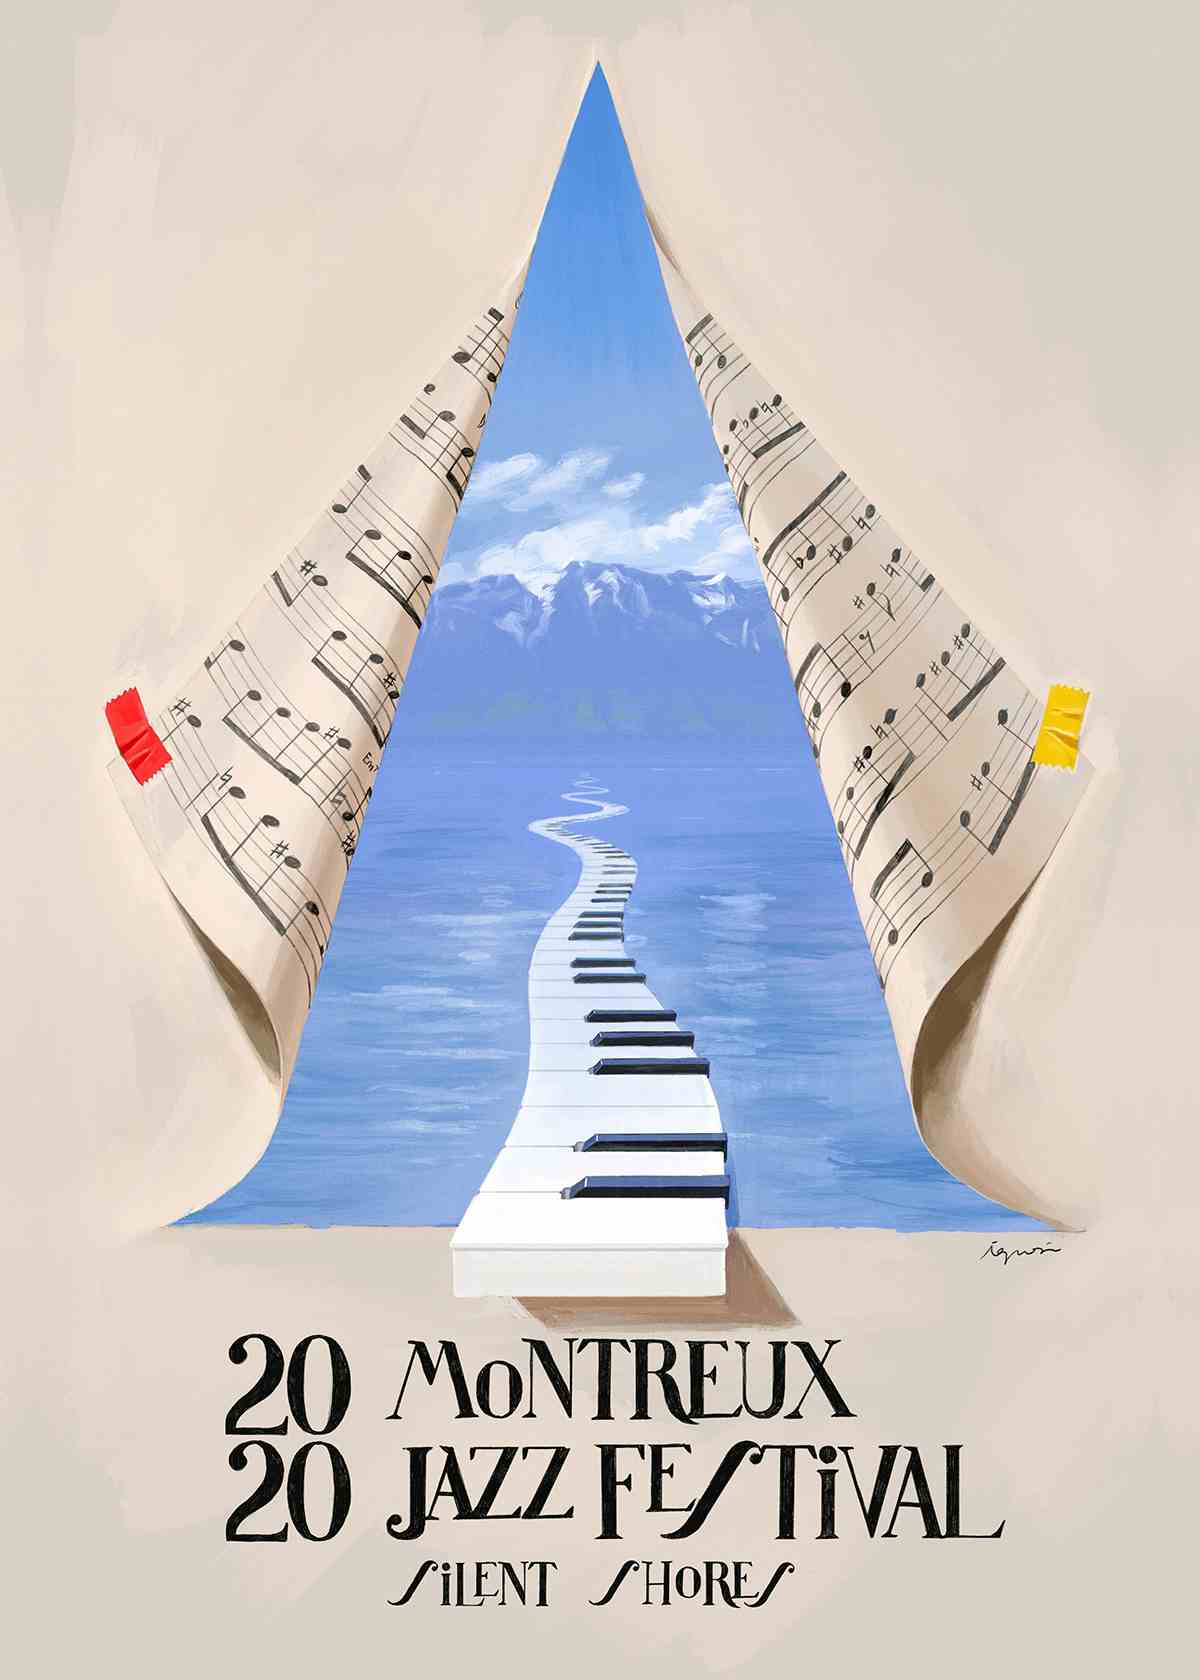 Artists create posters in lieu of Montreux Jazz Festival